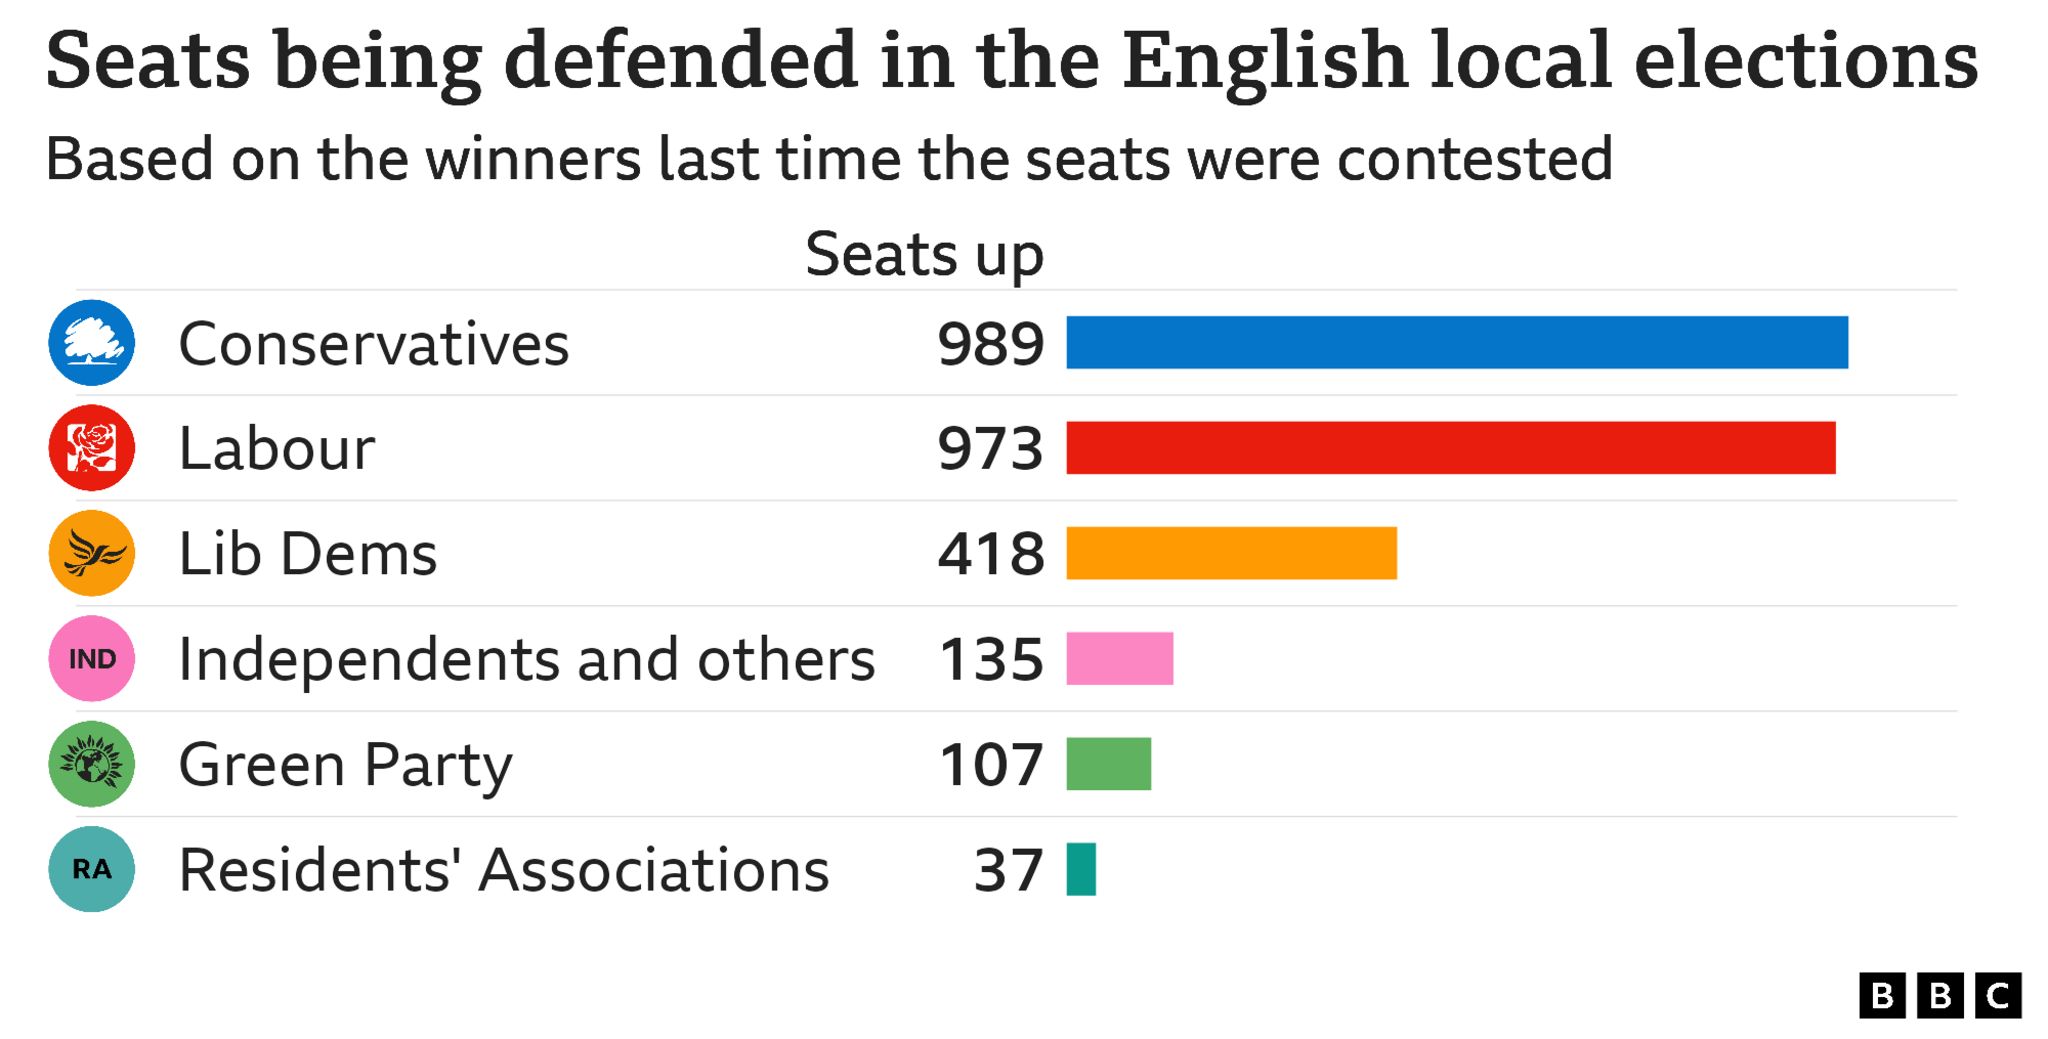 Bar chart showing council seats defended by each party in England,  Conservatives 989, Labour 973, Lib Dems 418, Independents and others 135, Green Party 107, Residents' Associations 37